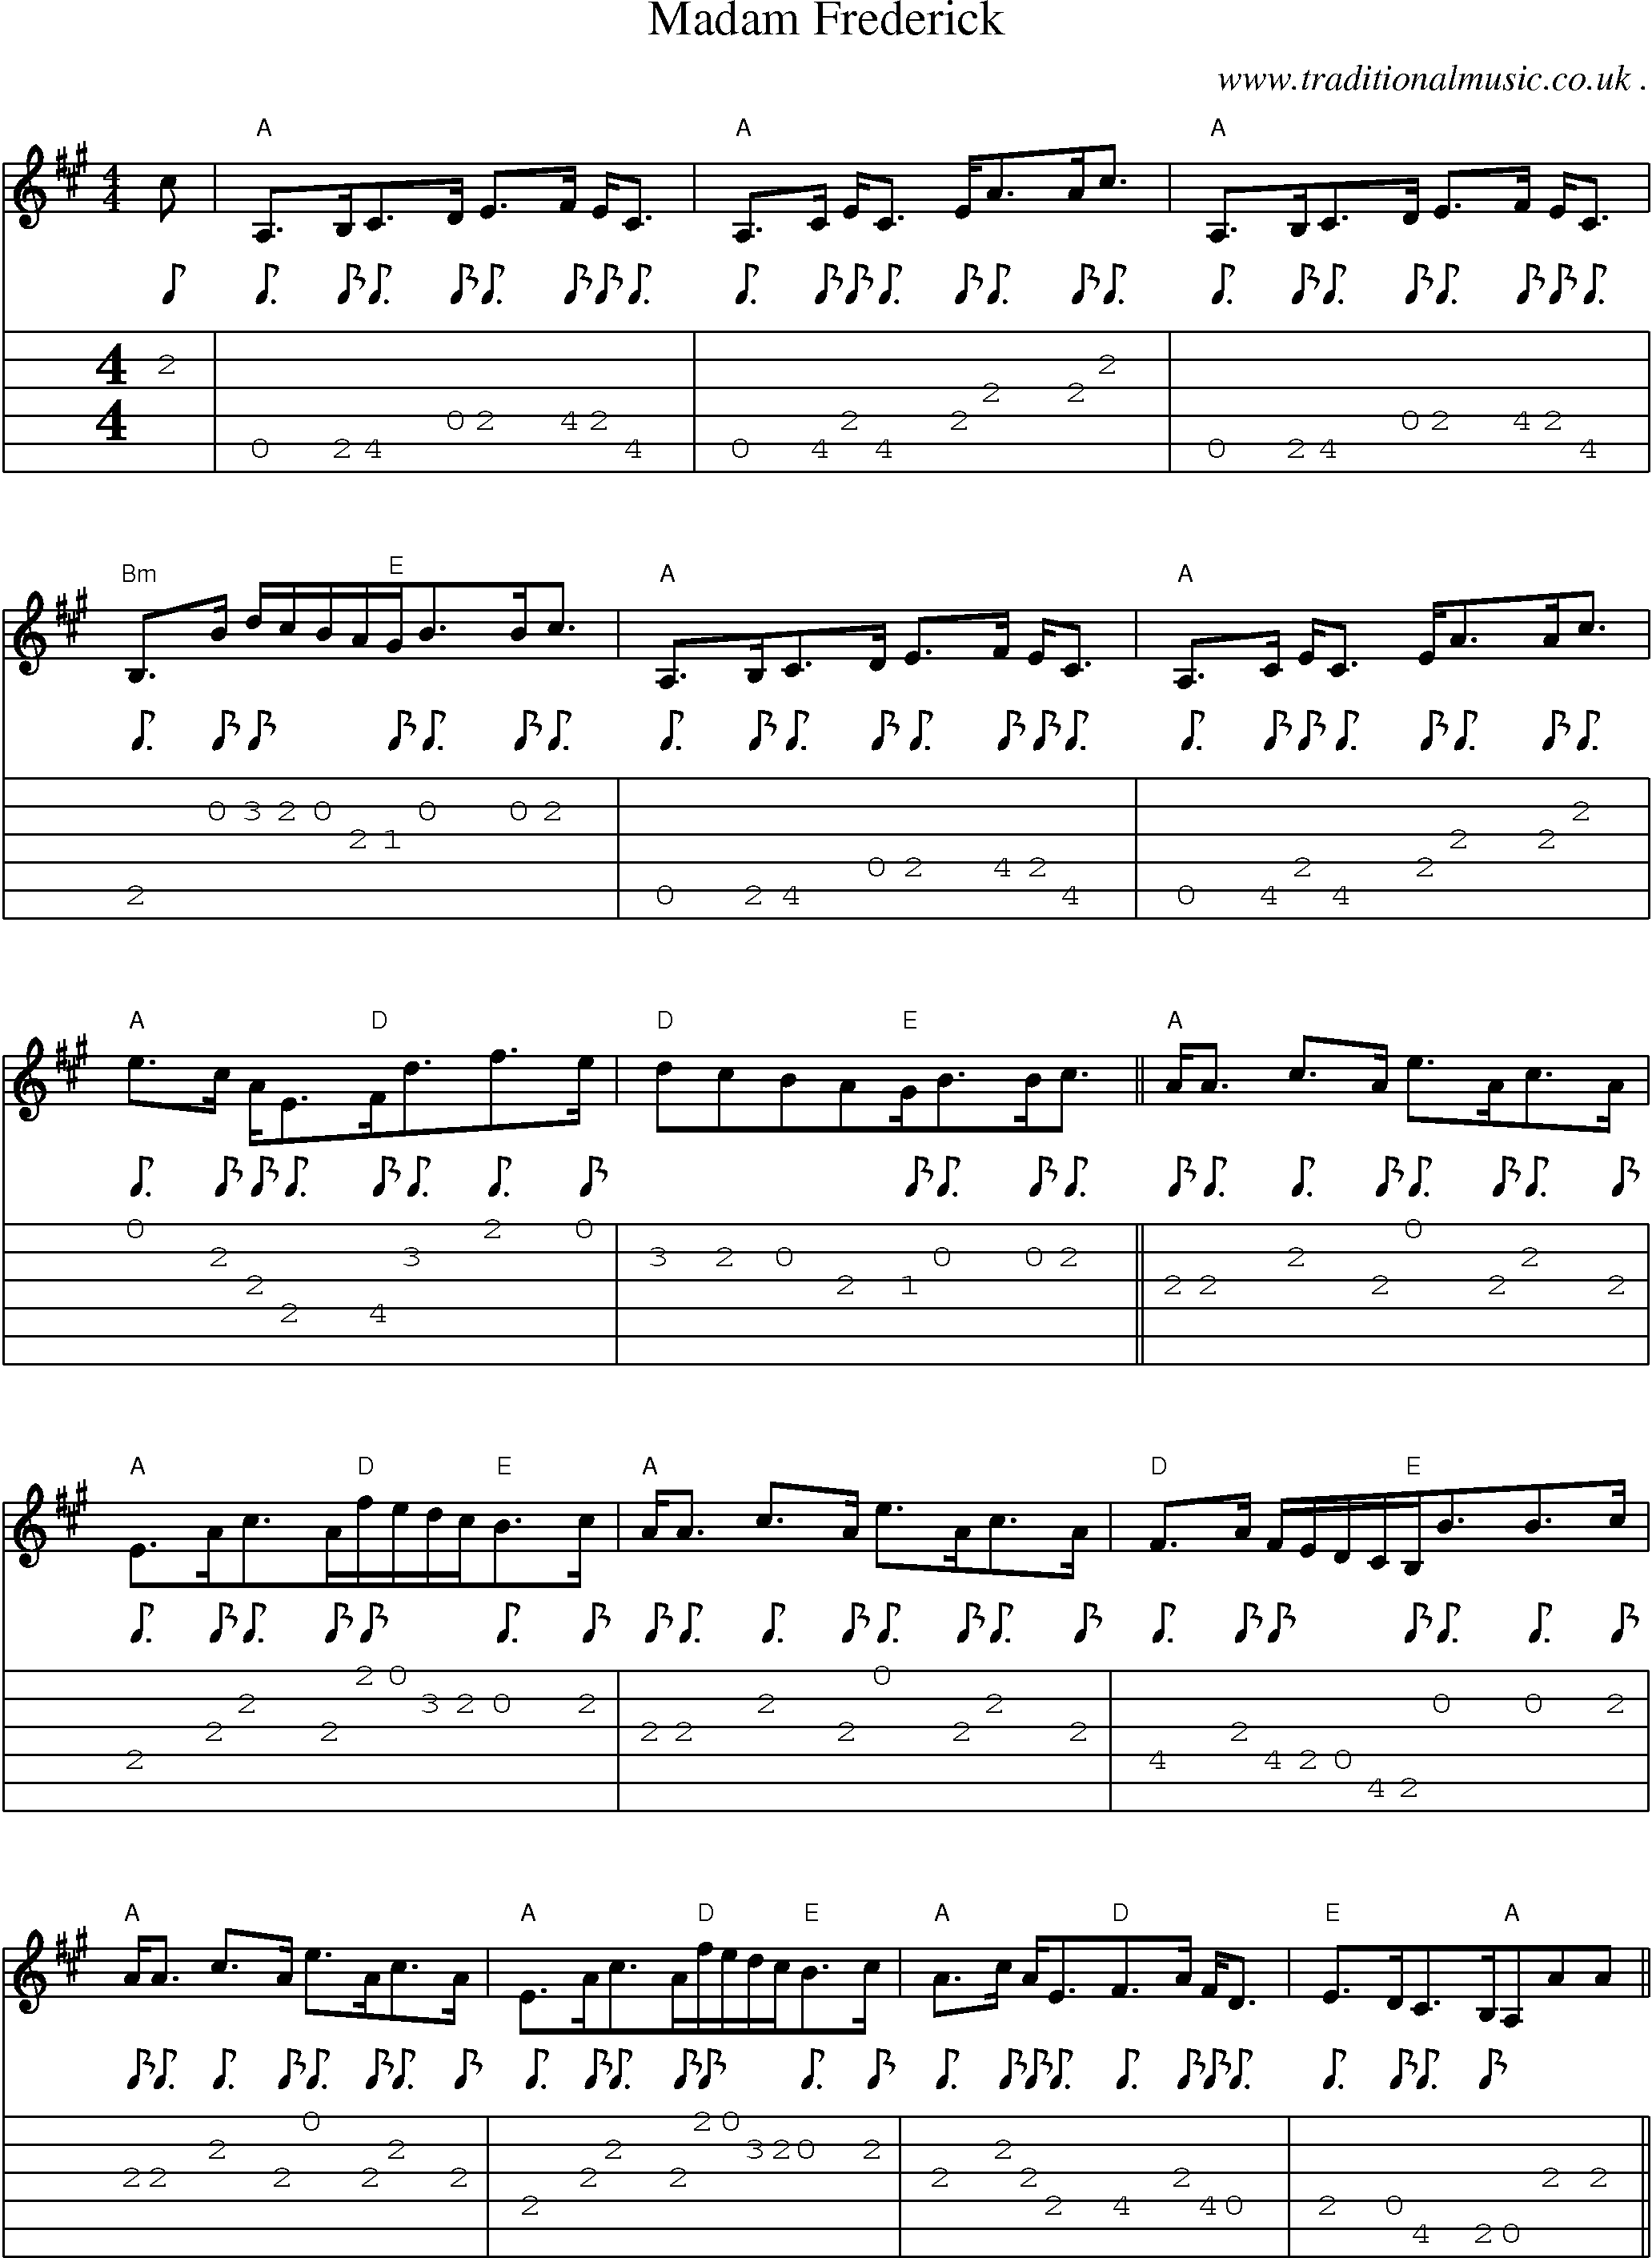 Sheet-Music and Guitar Tabs for Madam Frederick